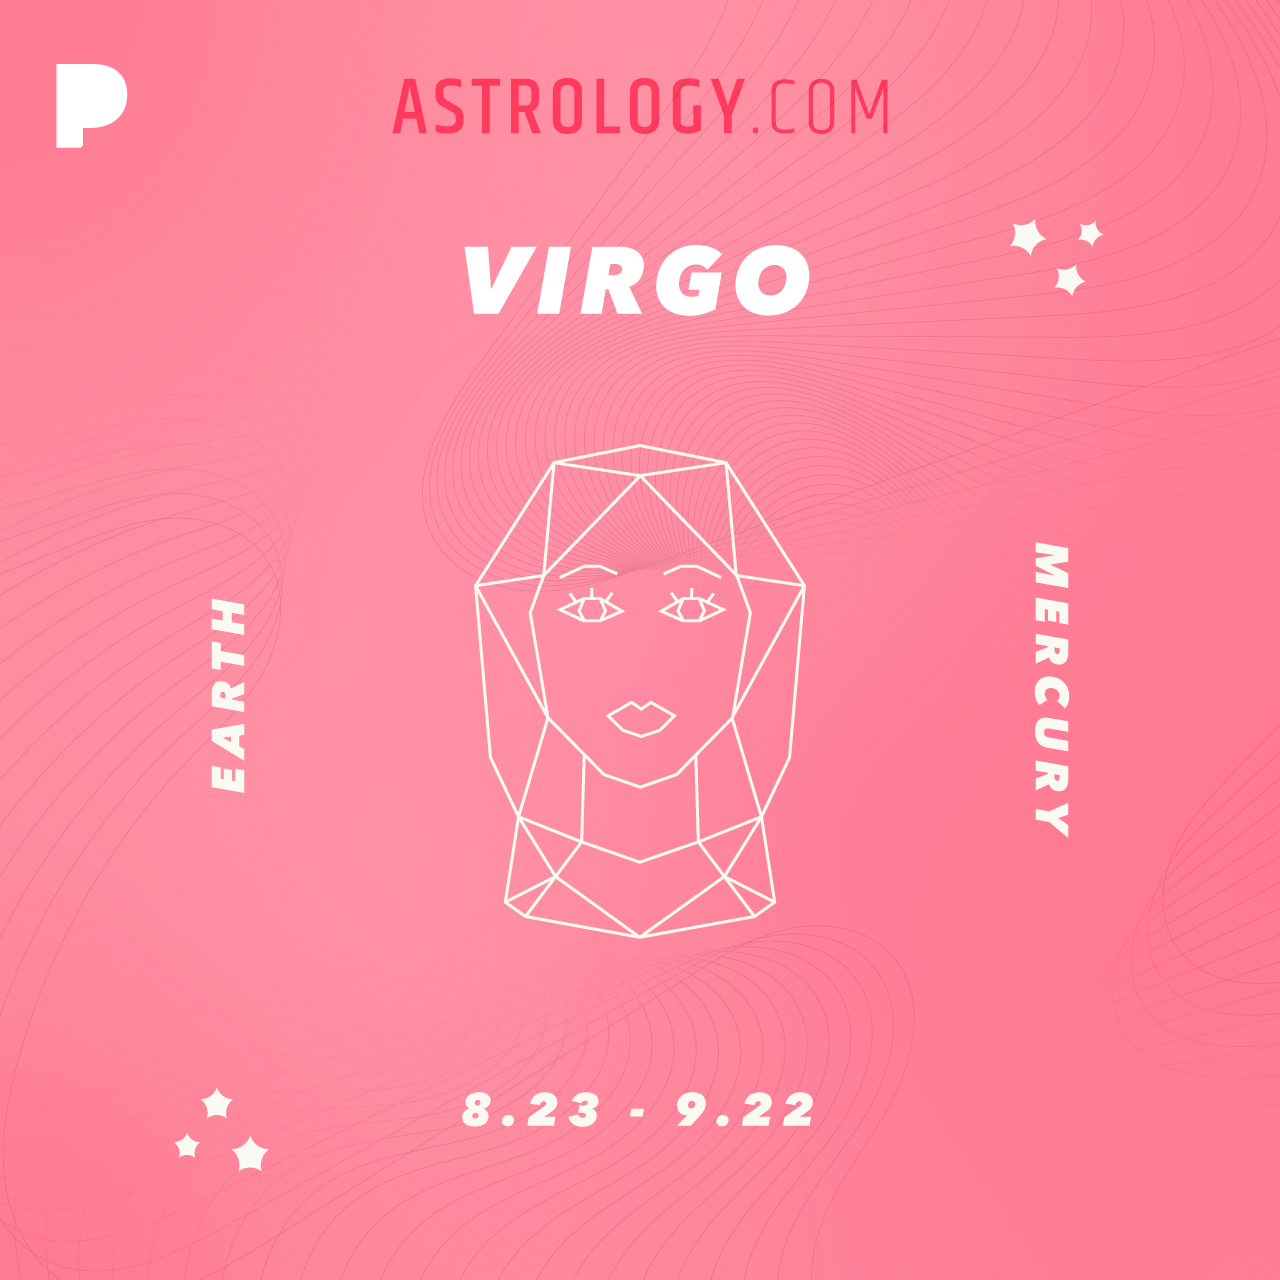 Our Virgo Season Pandora Playlist—It's Time to Finish Off The Summer Strong